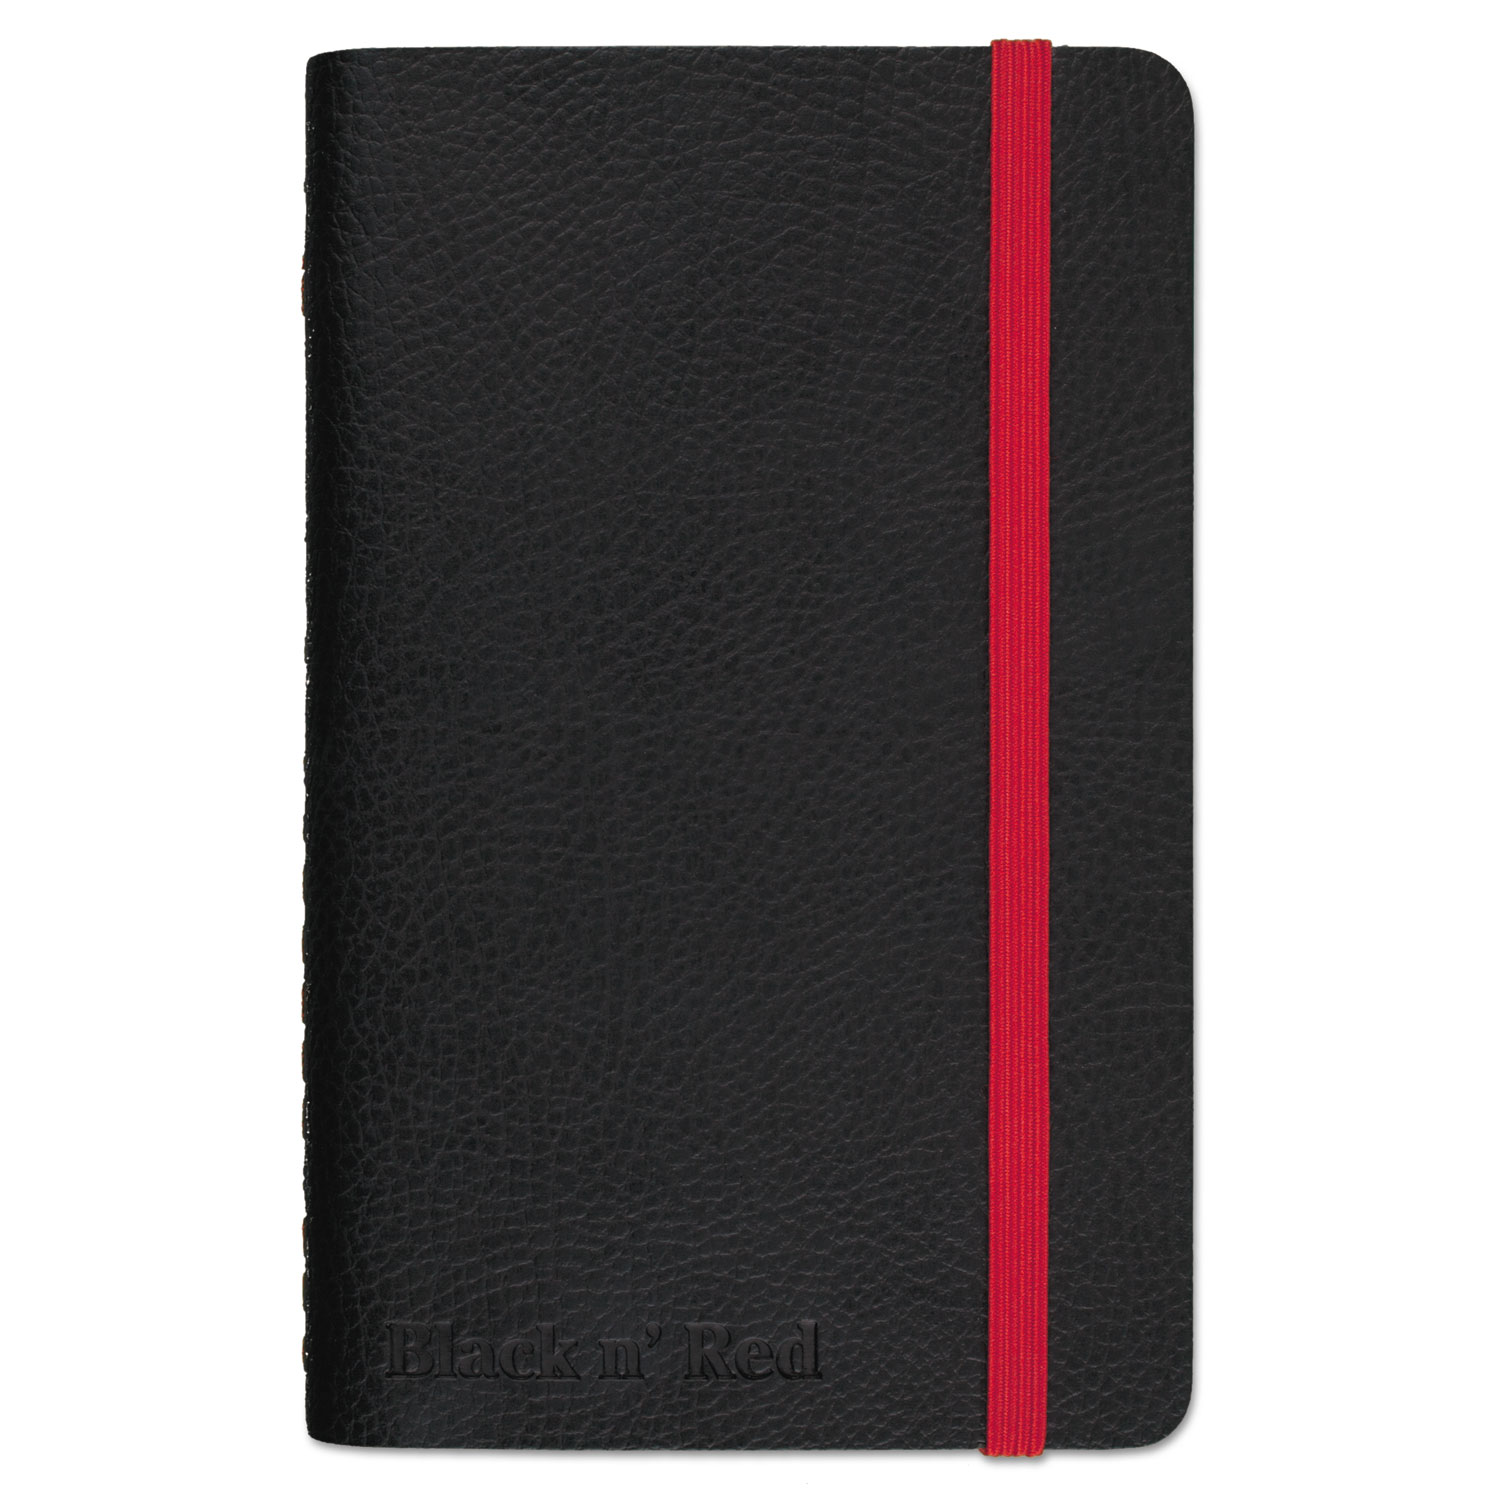  Black n' Red 400065001 Black Soft Cover Notebook, Wide/Legal Rule, Black Cover, 5.5 x 3.5, 71 Sheets (JDK400065001) 